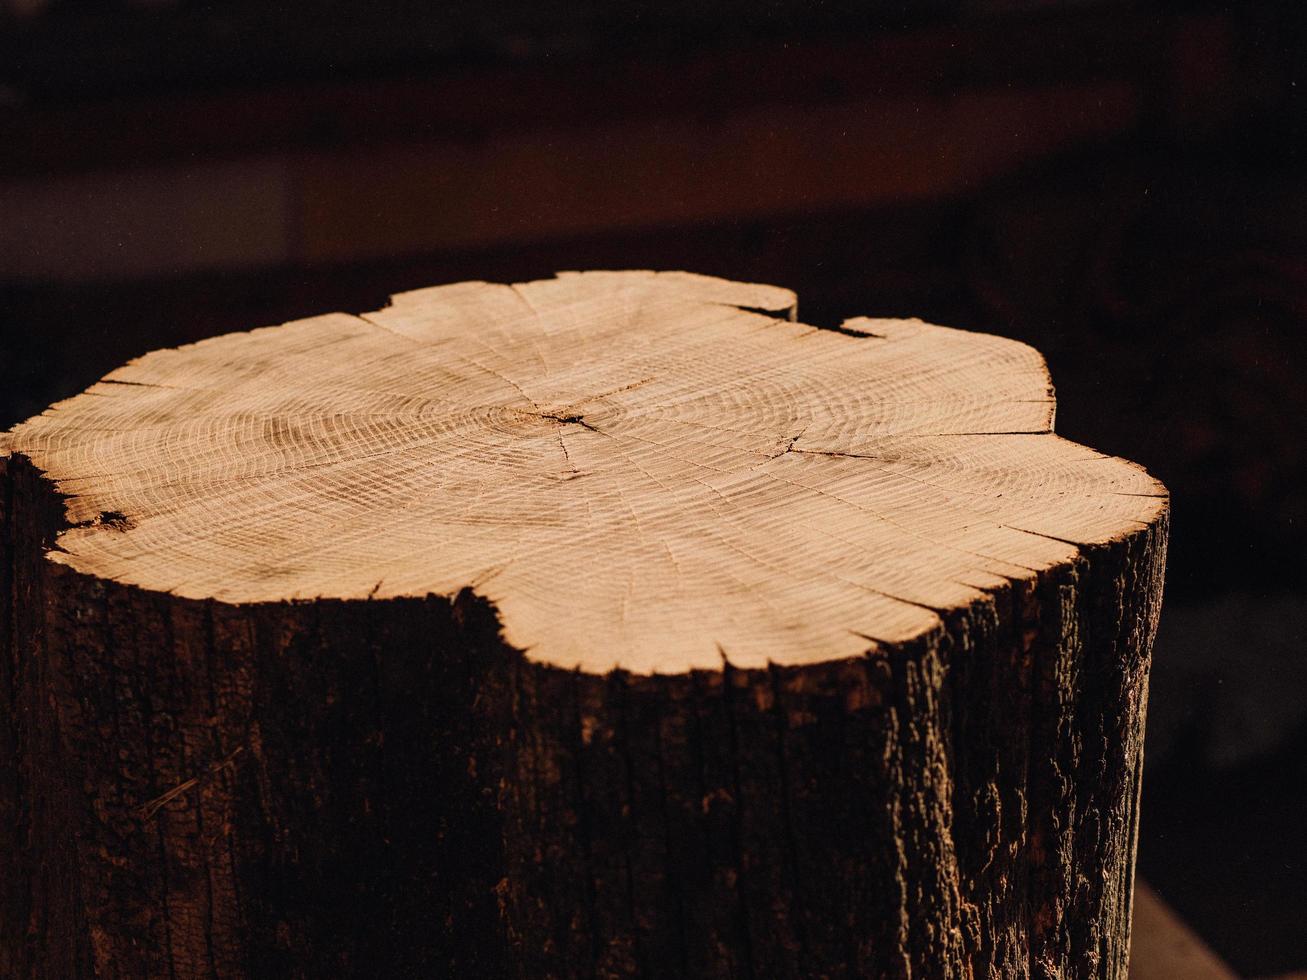 large acacia wood stump in daylight. woodworking concept photo